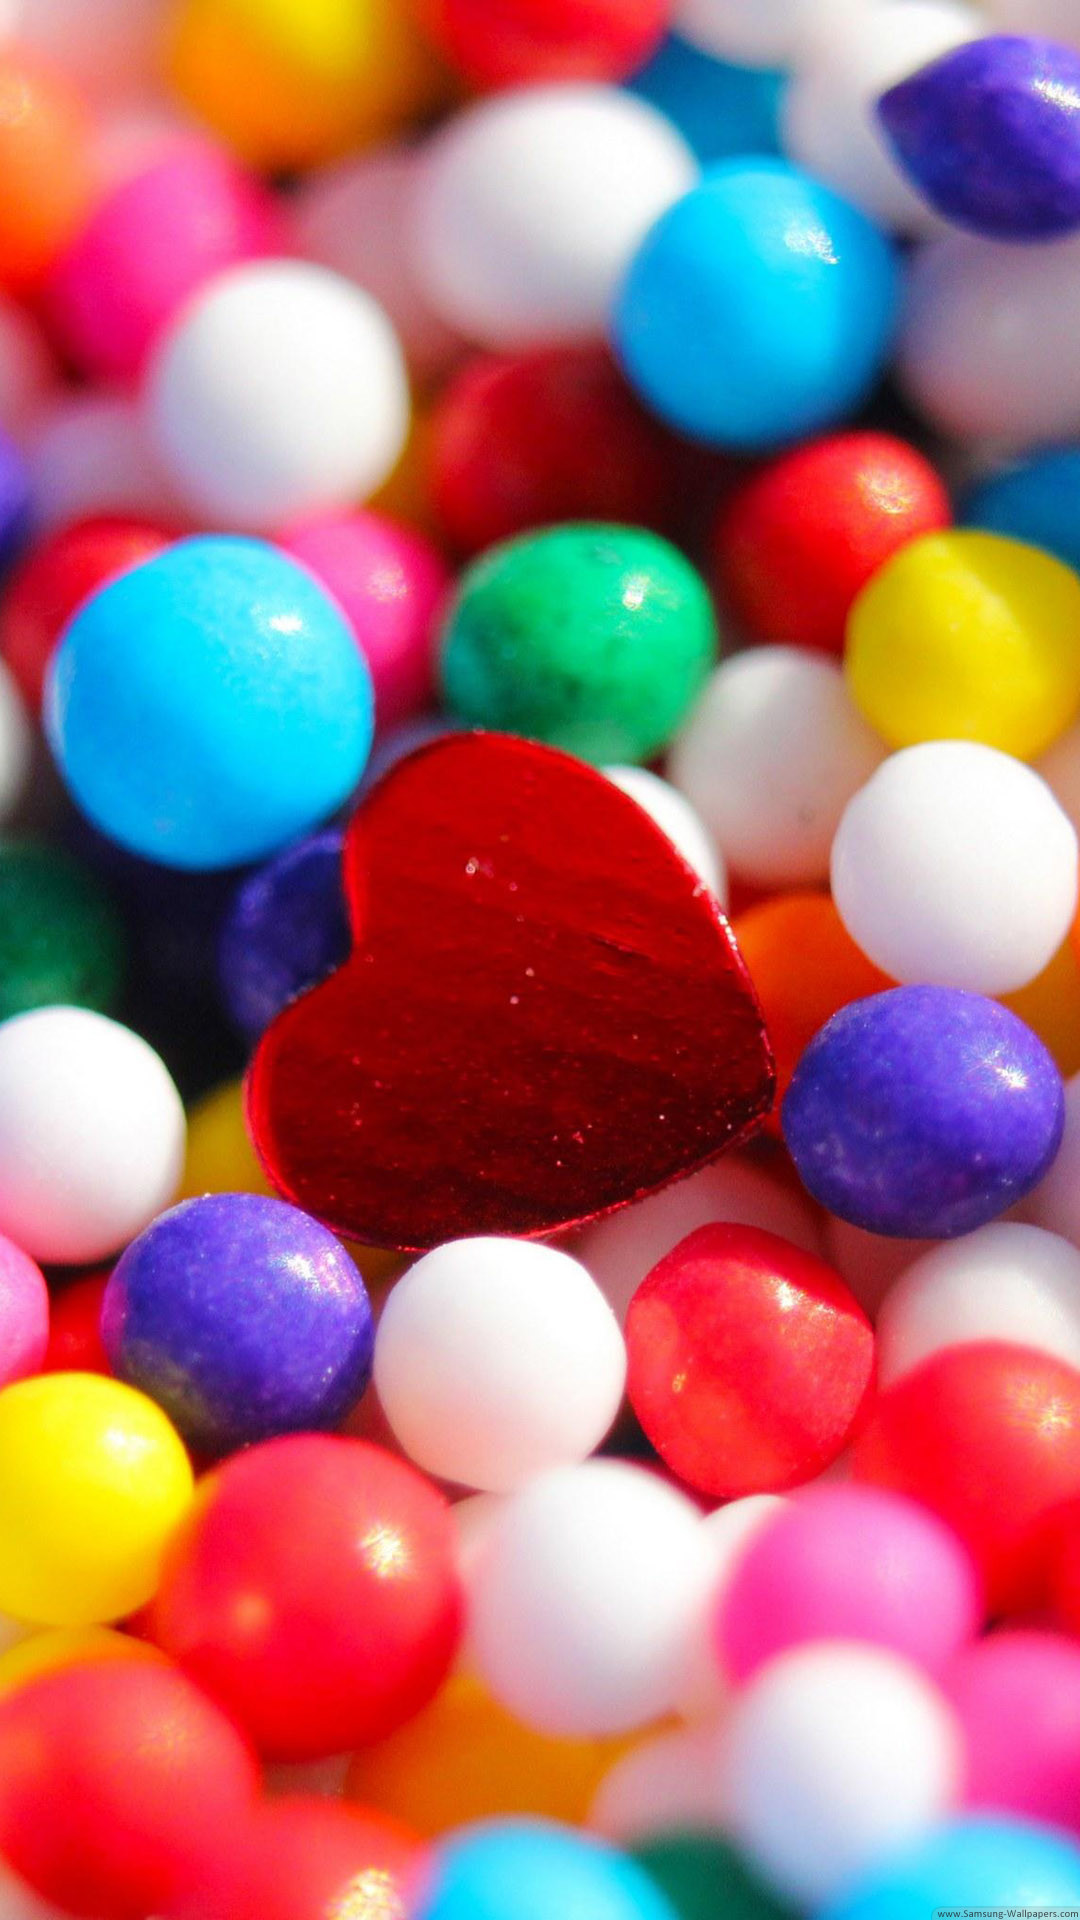 1080x1920 Hd wallpaper for samsung - Colorful Marbles Red Heart Iphone 6 Plus Hd  Wallpaper